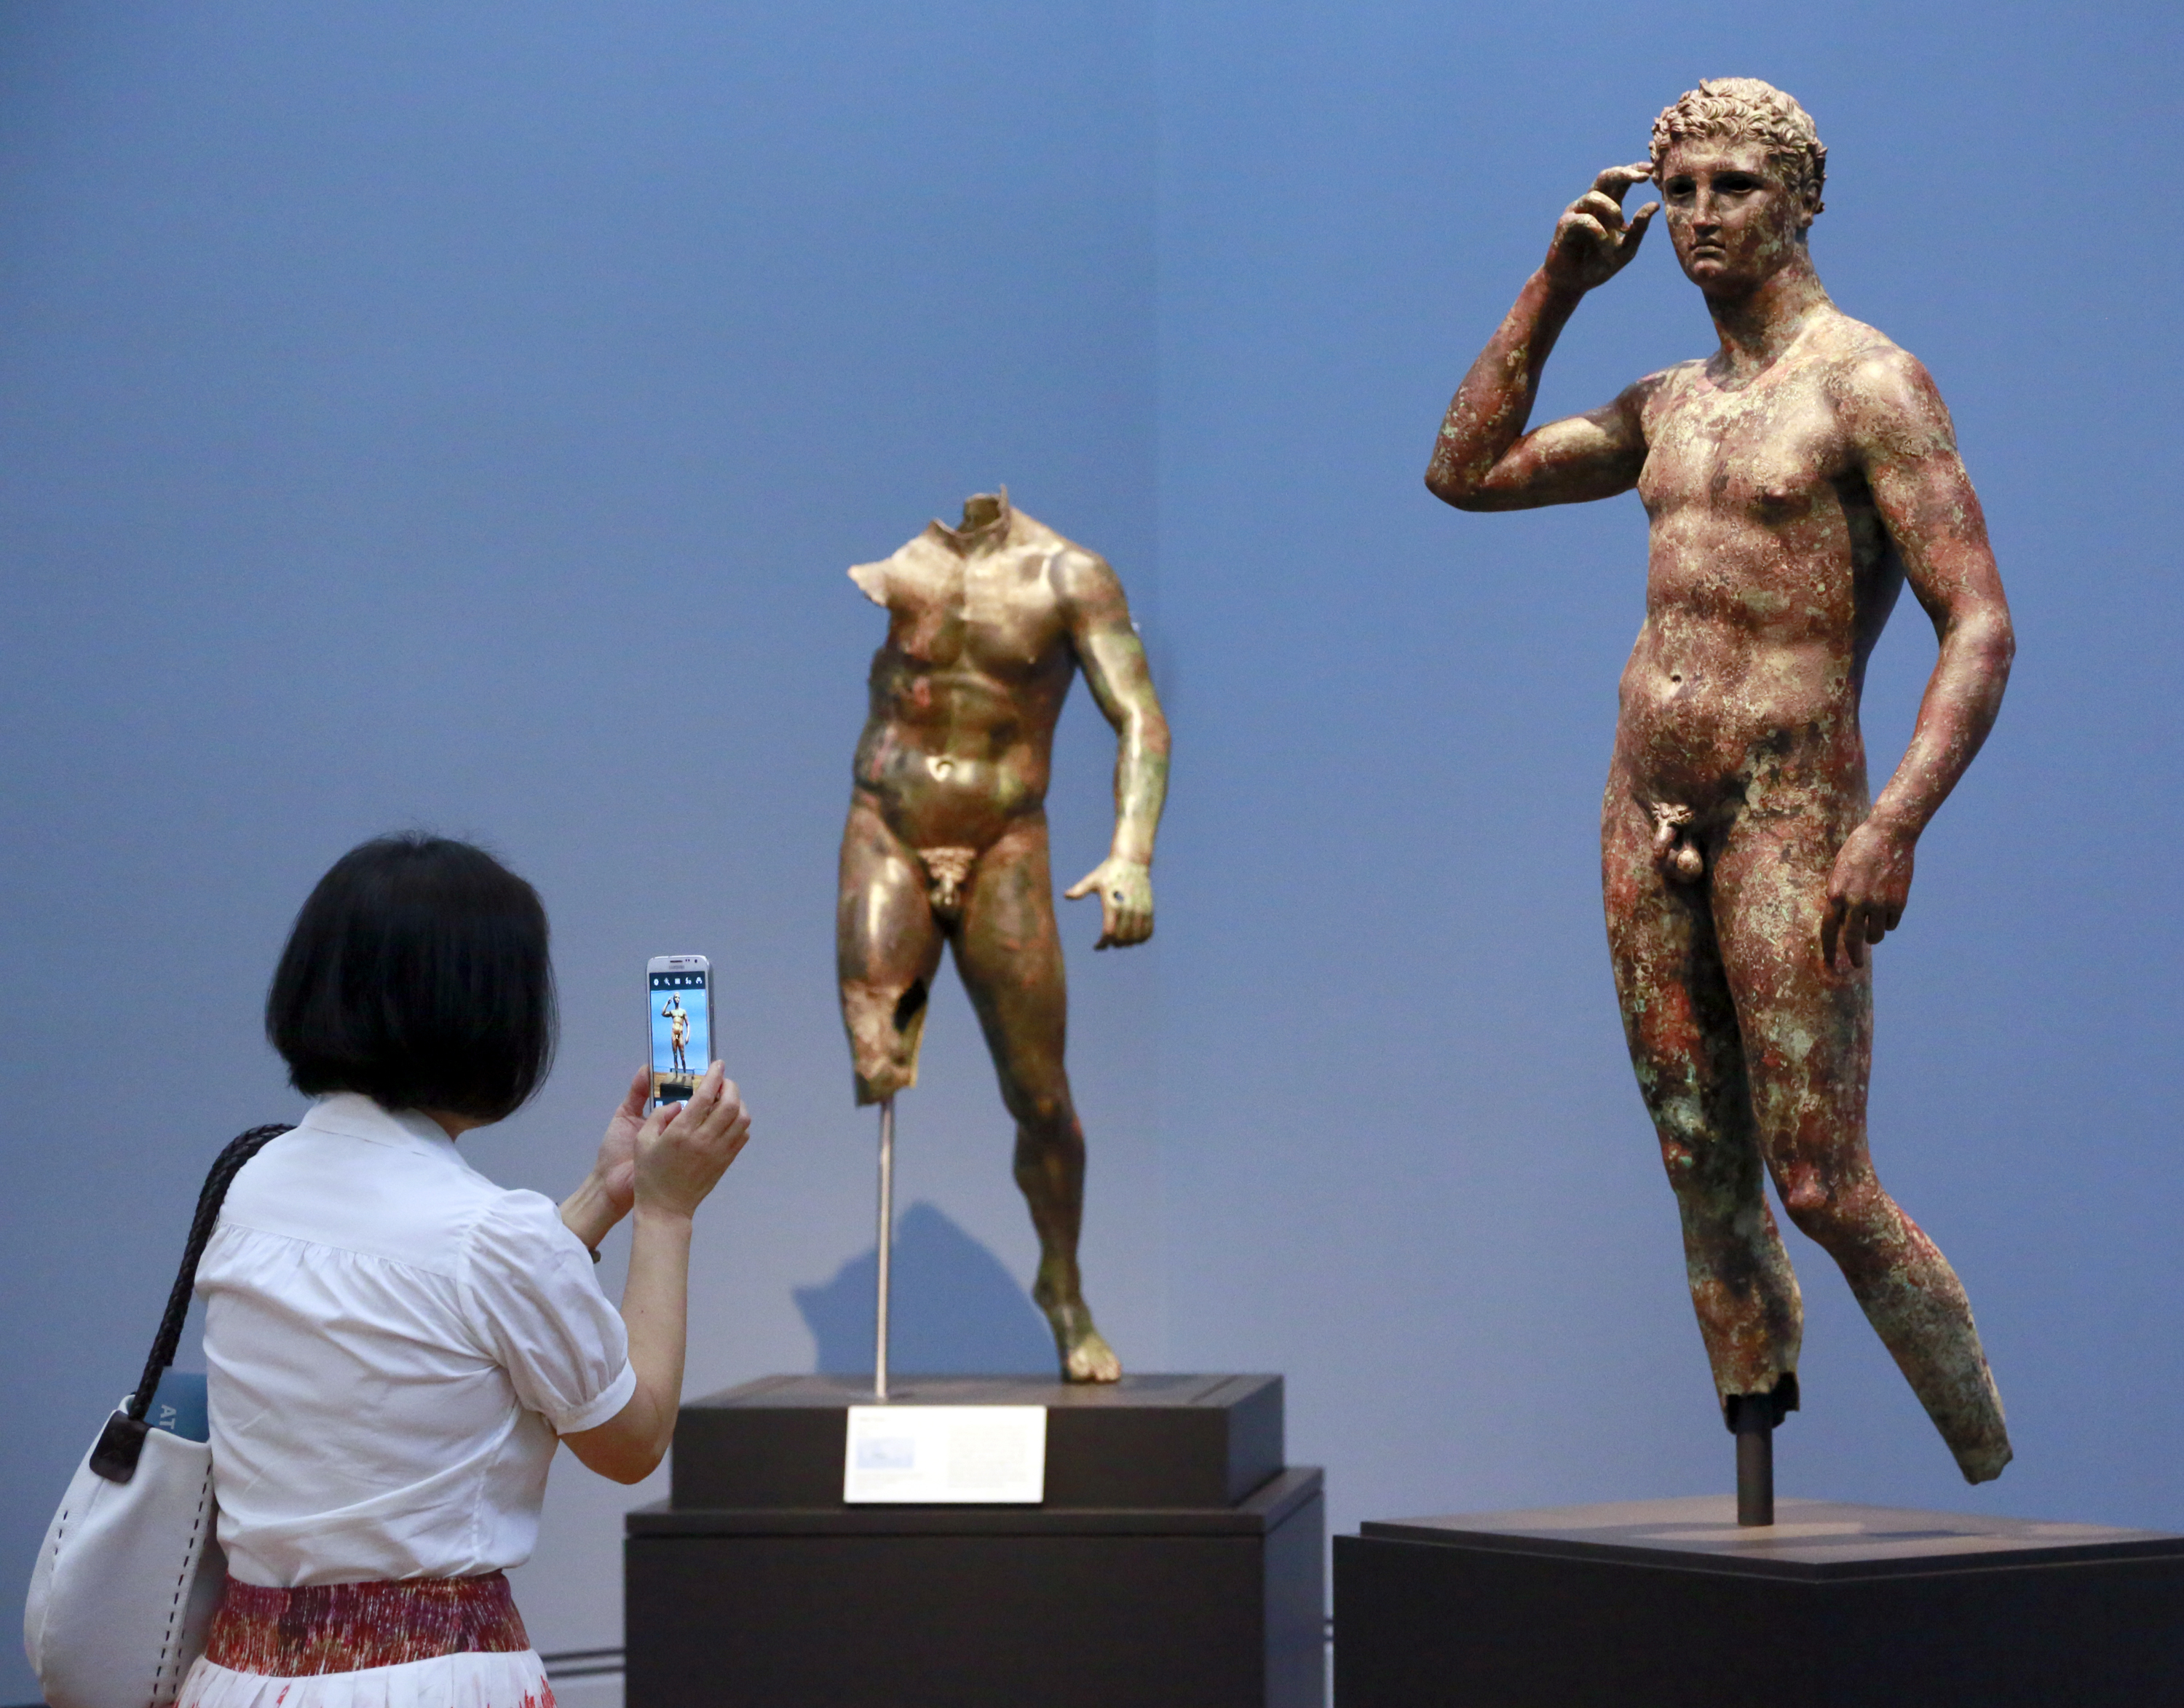 FILE - Reporter Sookee Chung takes a photo of a sculpture titled "Statue of a Victorious Youth, 300-100 B.C." at the J. Paul Getty Museum in Los Angeles, on July 27, 2015. A European court upheld Italy’s right to seize a prized Greek statue from the J. Paul Getty Museum in California, rejecting the museum’s appeal on Thursday and ruling Italy was right to try to reclaim an important part of its cultural heritage. (AP Photo/Nick Ut, File)